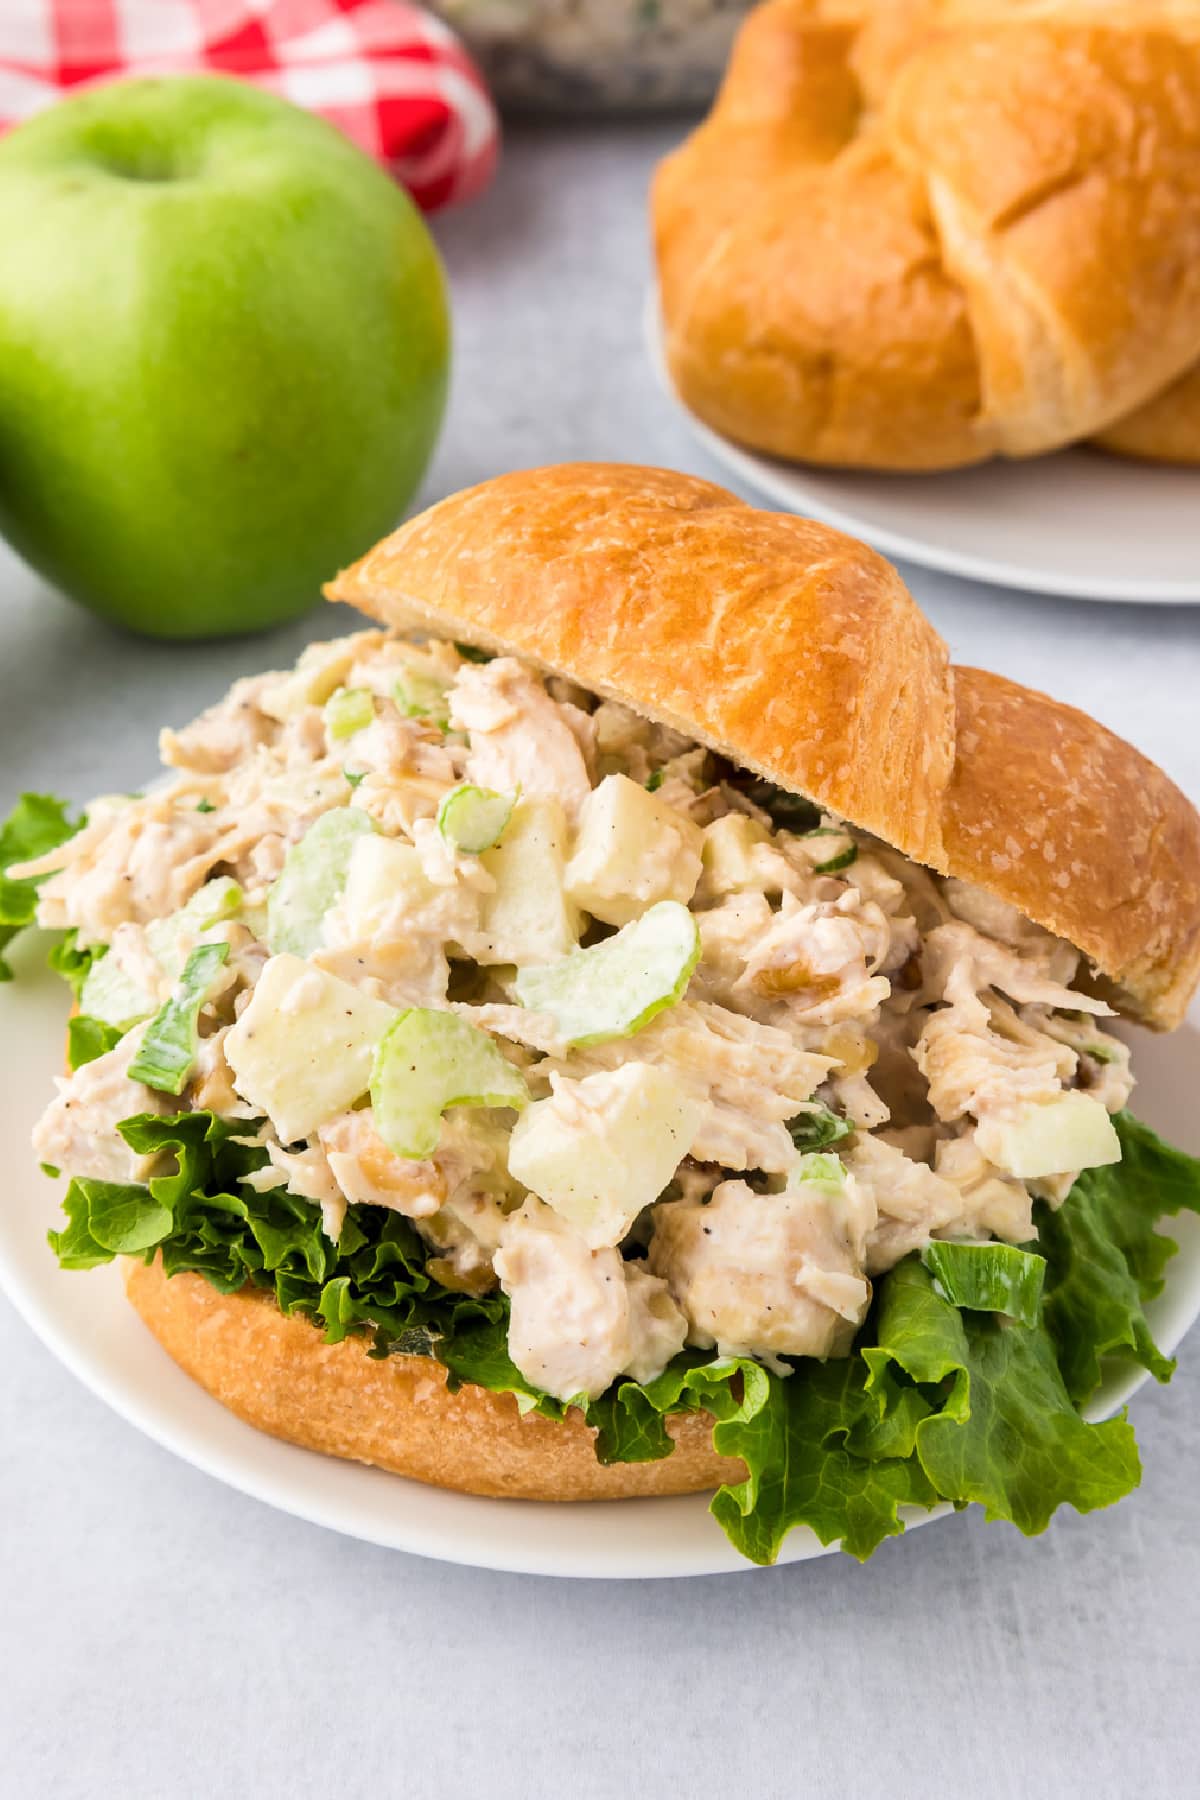 A apple walnut chicken salad sandwich on a croissant with more apples and croissants nearby.